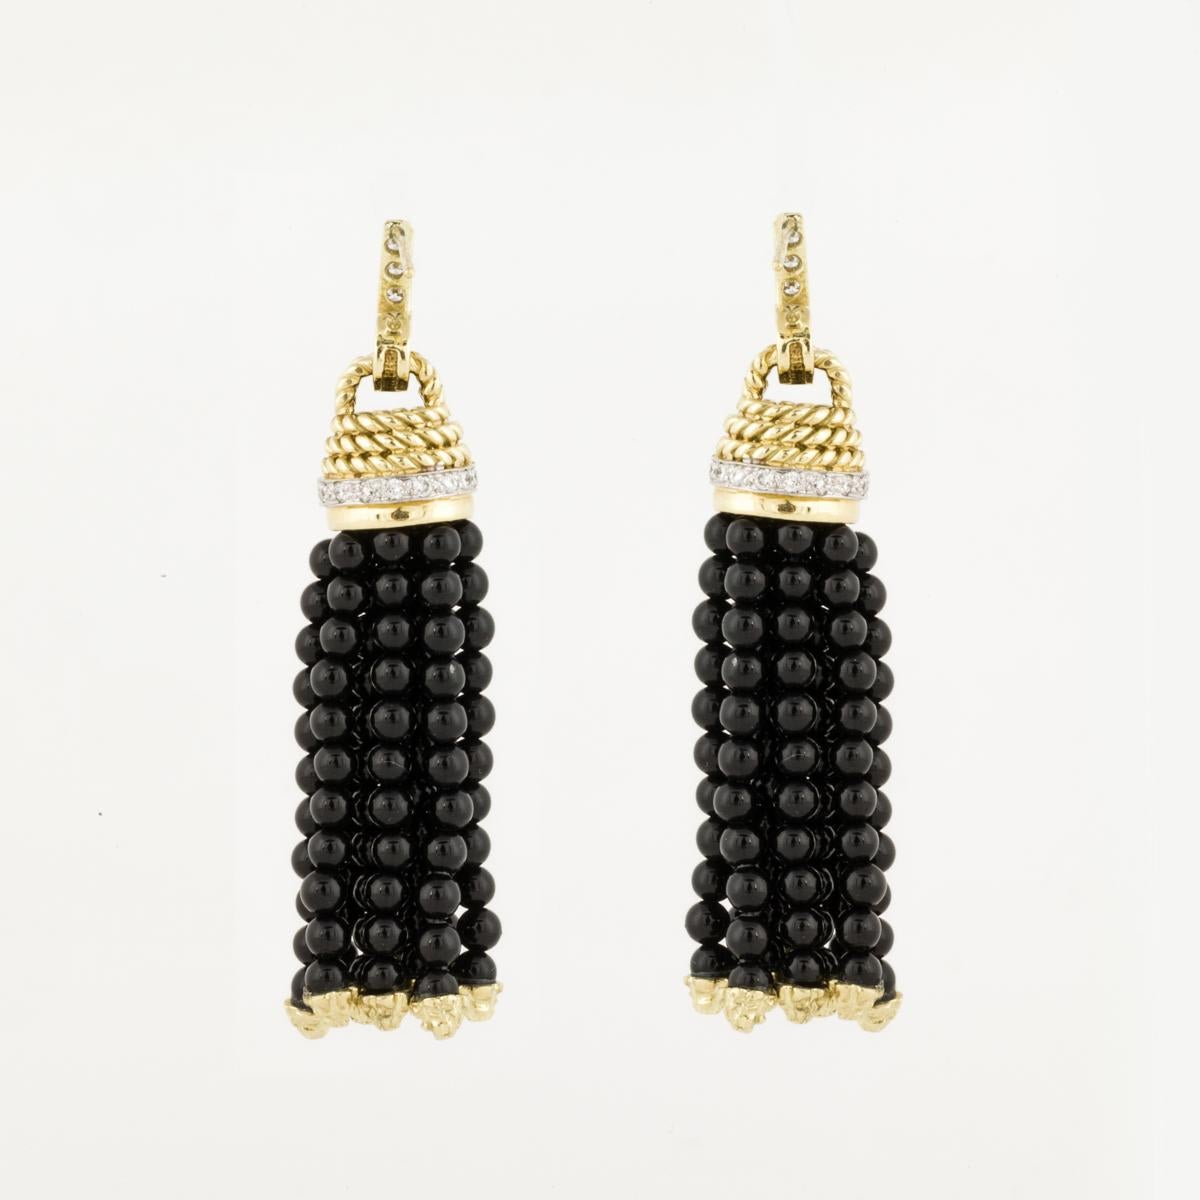 18K yellow and white gold earrings by Cassis.  The tassels are black onyx beads with gold caps at the ends, with diamonds set in white gold.  The round diamonds total 0.76 carats, G-H color and VS clarity.  The earrings measure 2 1/2 inches long and